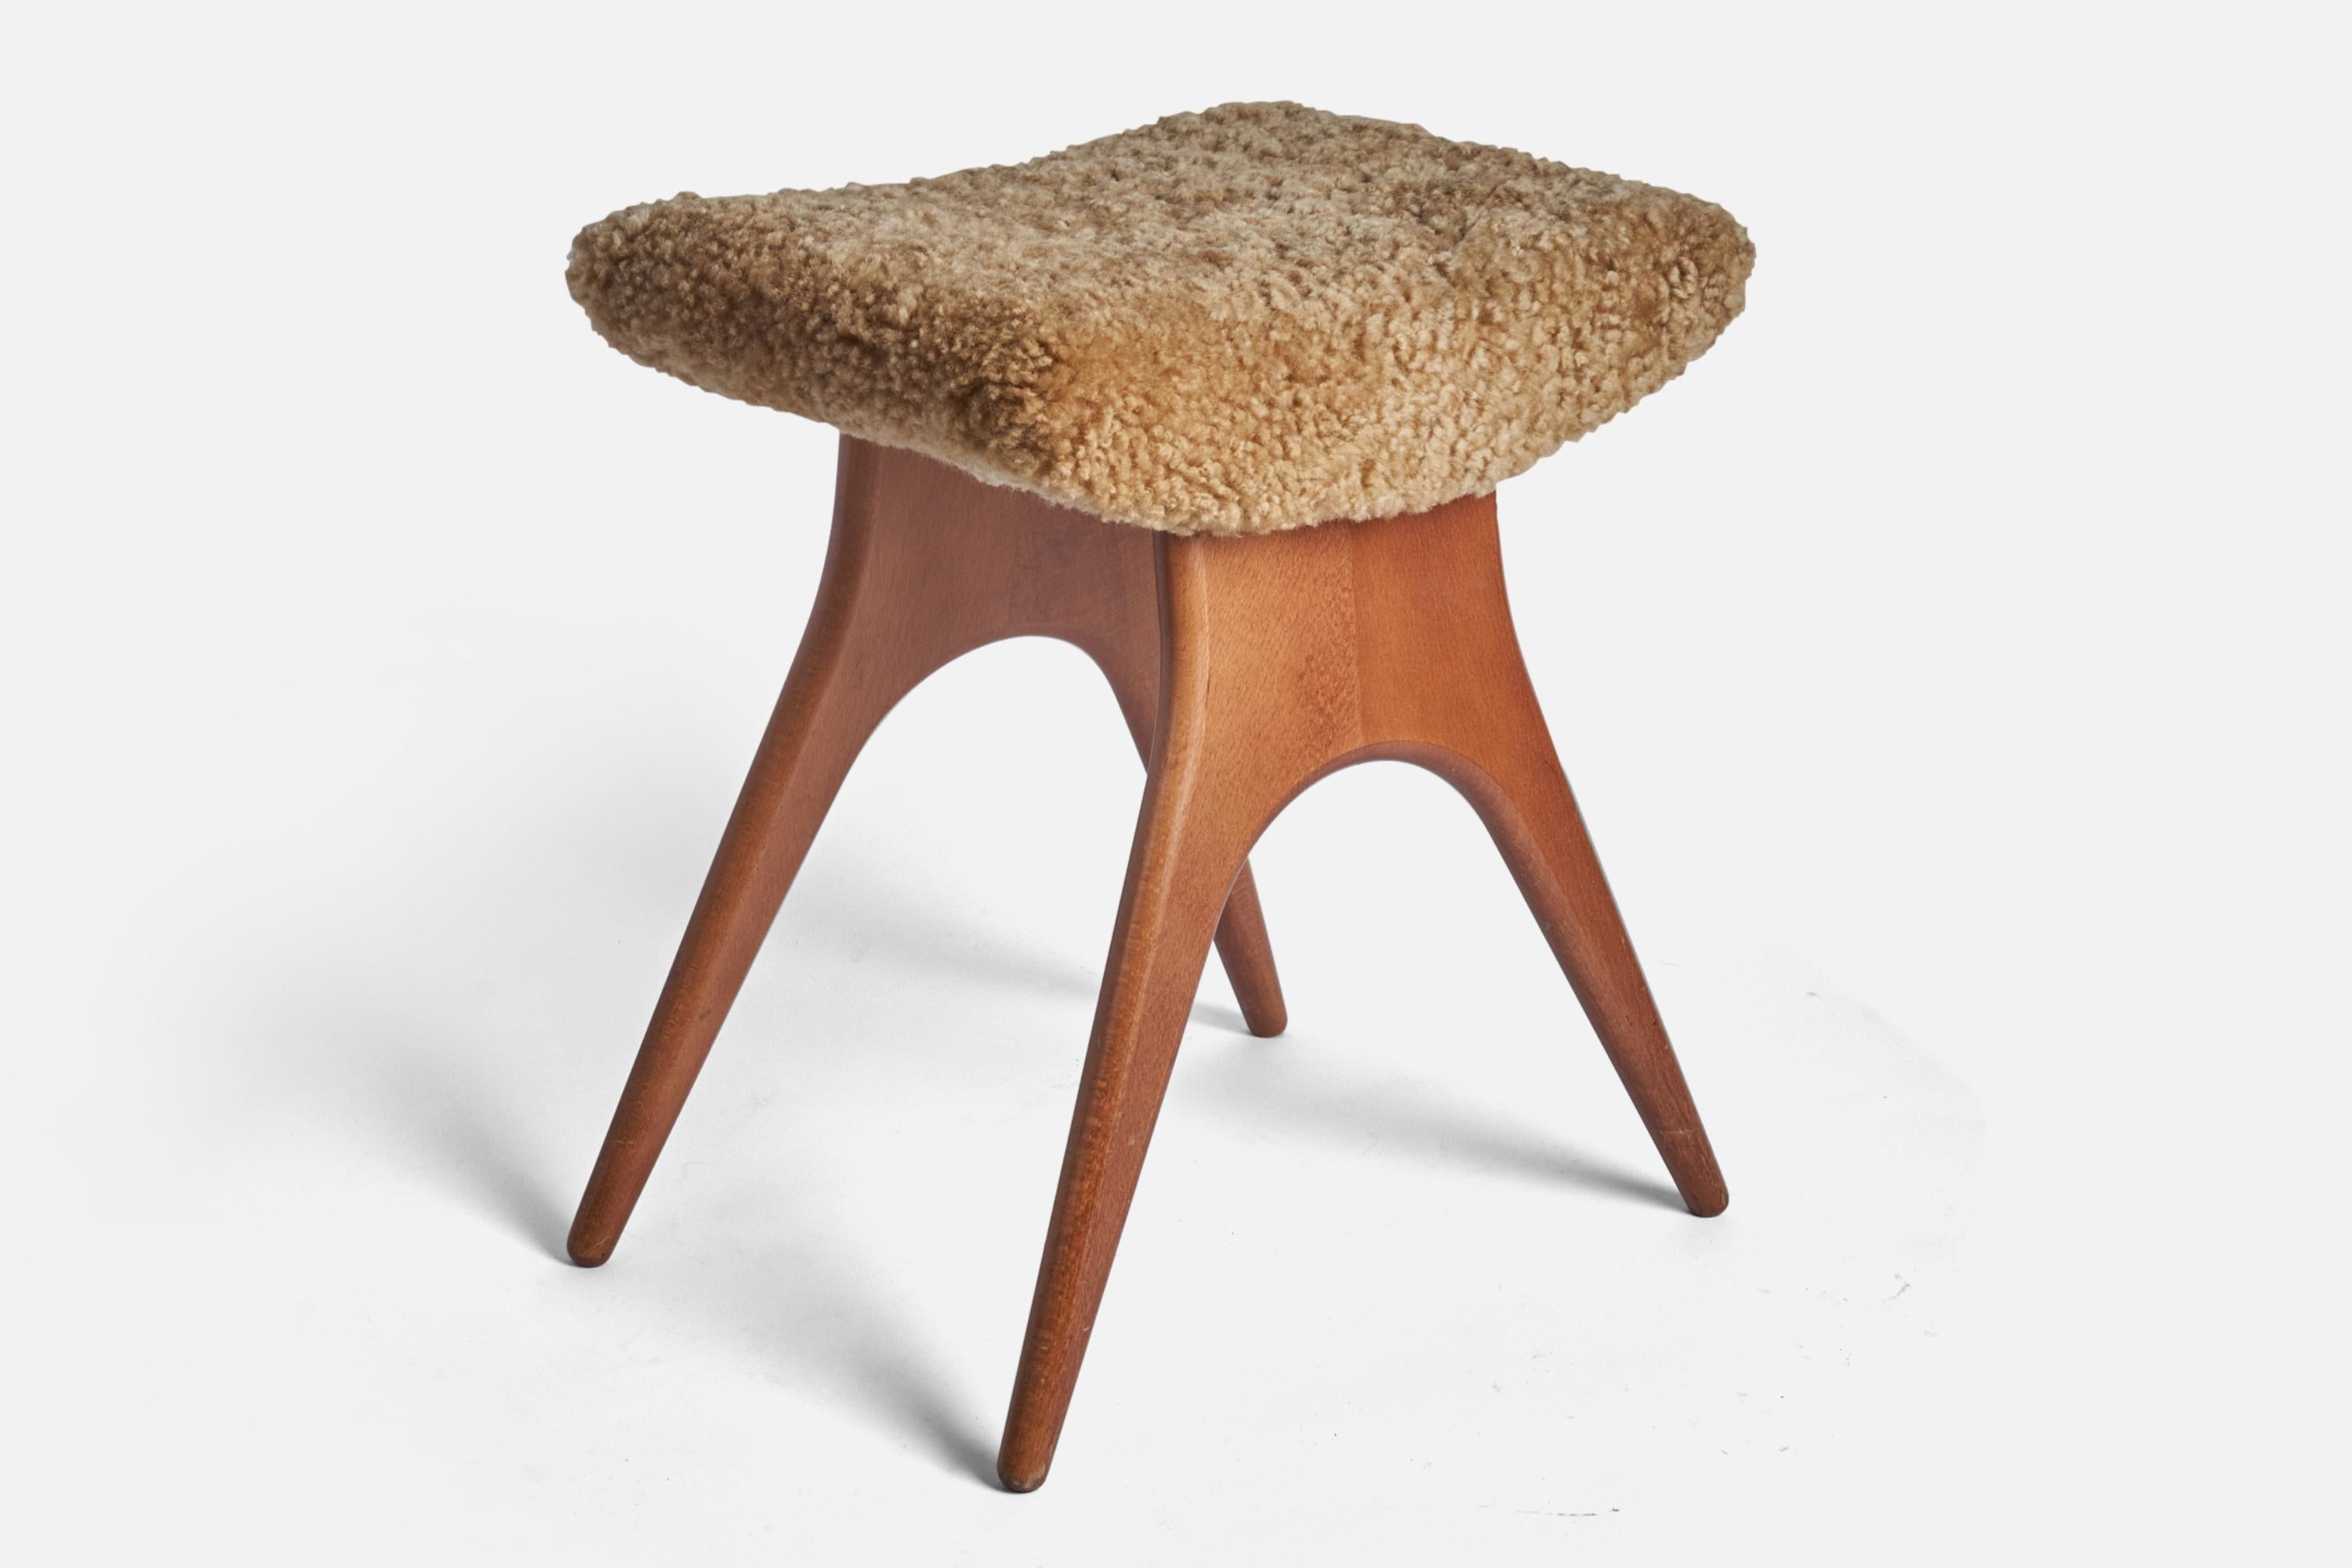 A stool in stained oak, overstuffed seat reupholstered in brand new sheepskin upholstery. Produced in Sweden, 1950s.

Other designers of the period include Finn Juhl, Hans Wegner, Isamu Noguchi, Charlotte Perriand.